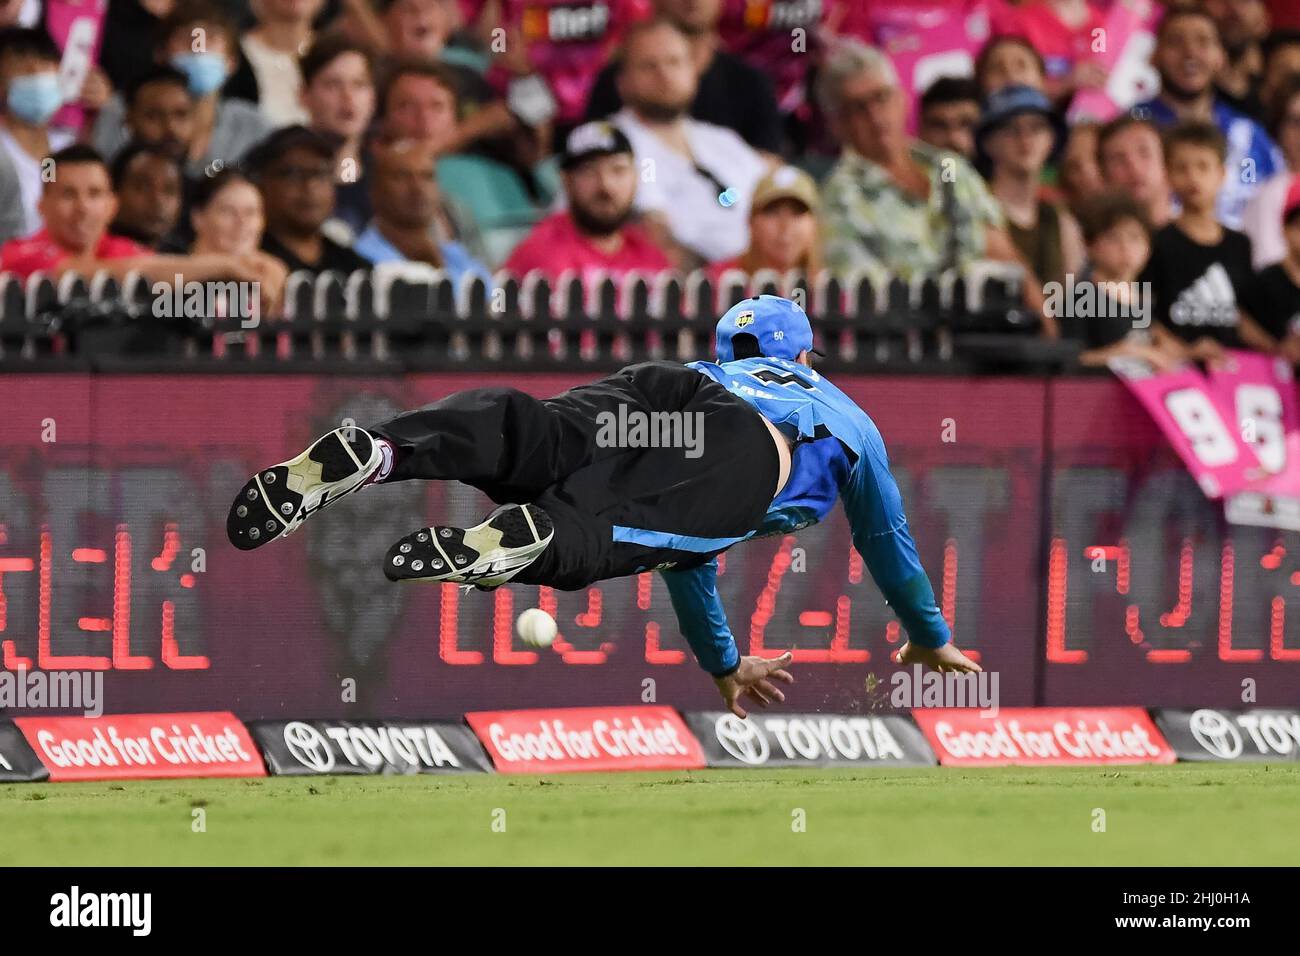 Sydney, Australia, 26 January, 2022. Matt Renshaw of the Strikers dives for a catch and misses during the Big Bash League Challenger cricket match between Sydney Sixers and Adelaide Strikers at The Sydney Cricket Ground on January 26, 2022 in Sydney, Australia. Credit: Steven Markham/Speed Media/Alamy Live News Stock Photo